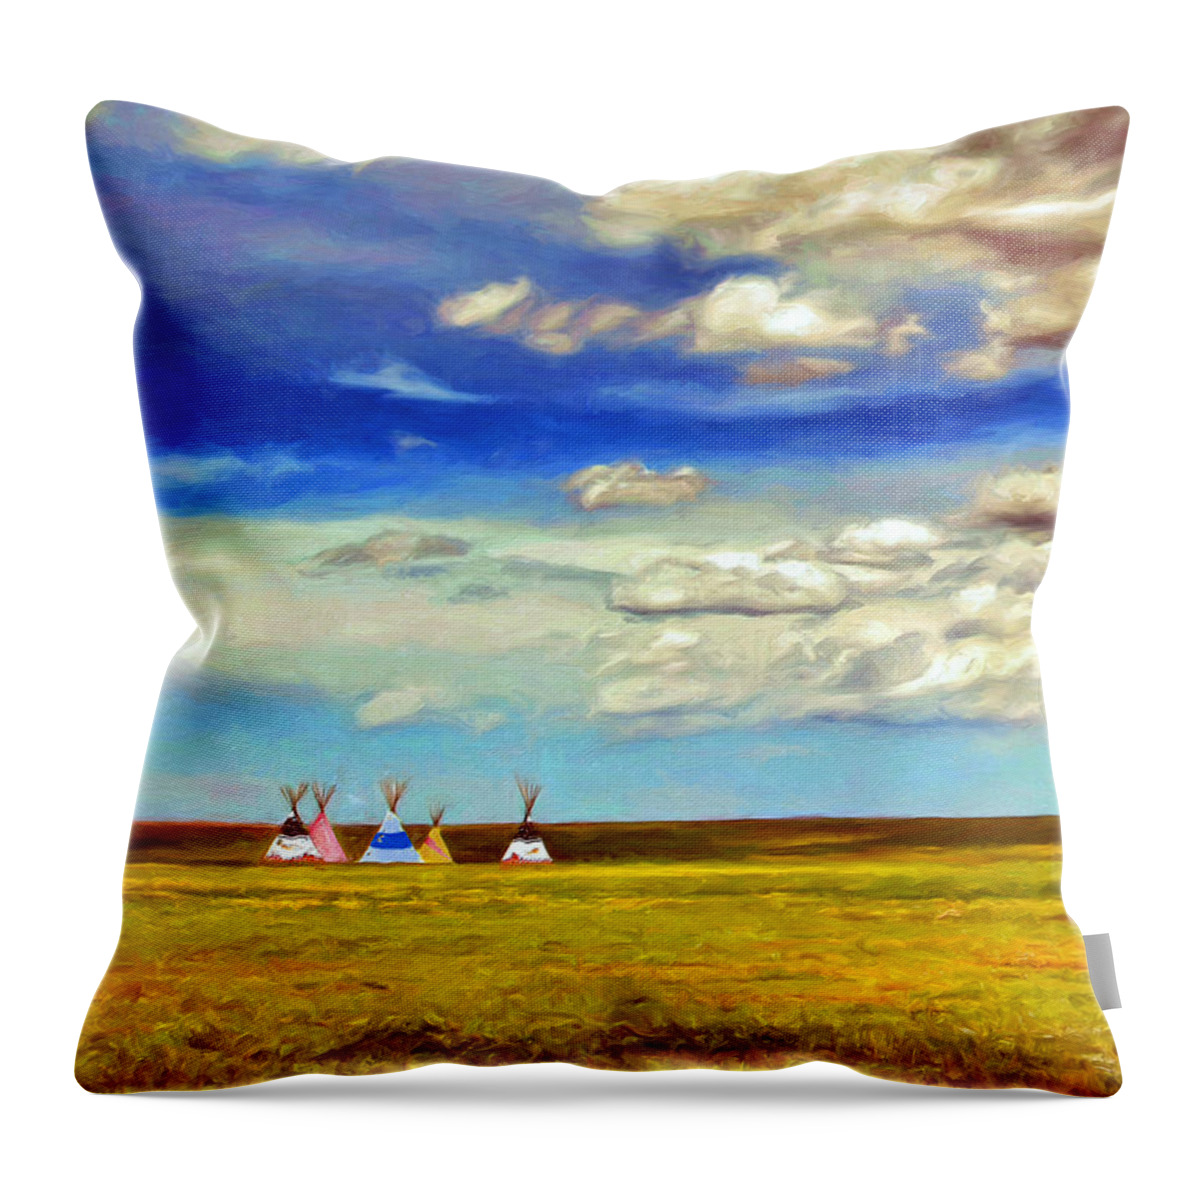 Teepees Throw Pillow featuring the painting We Belong To This Land by Dominic Piperata